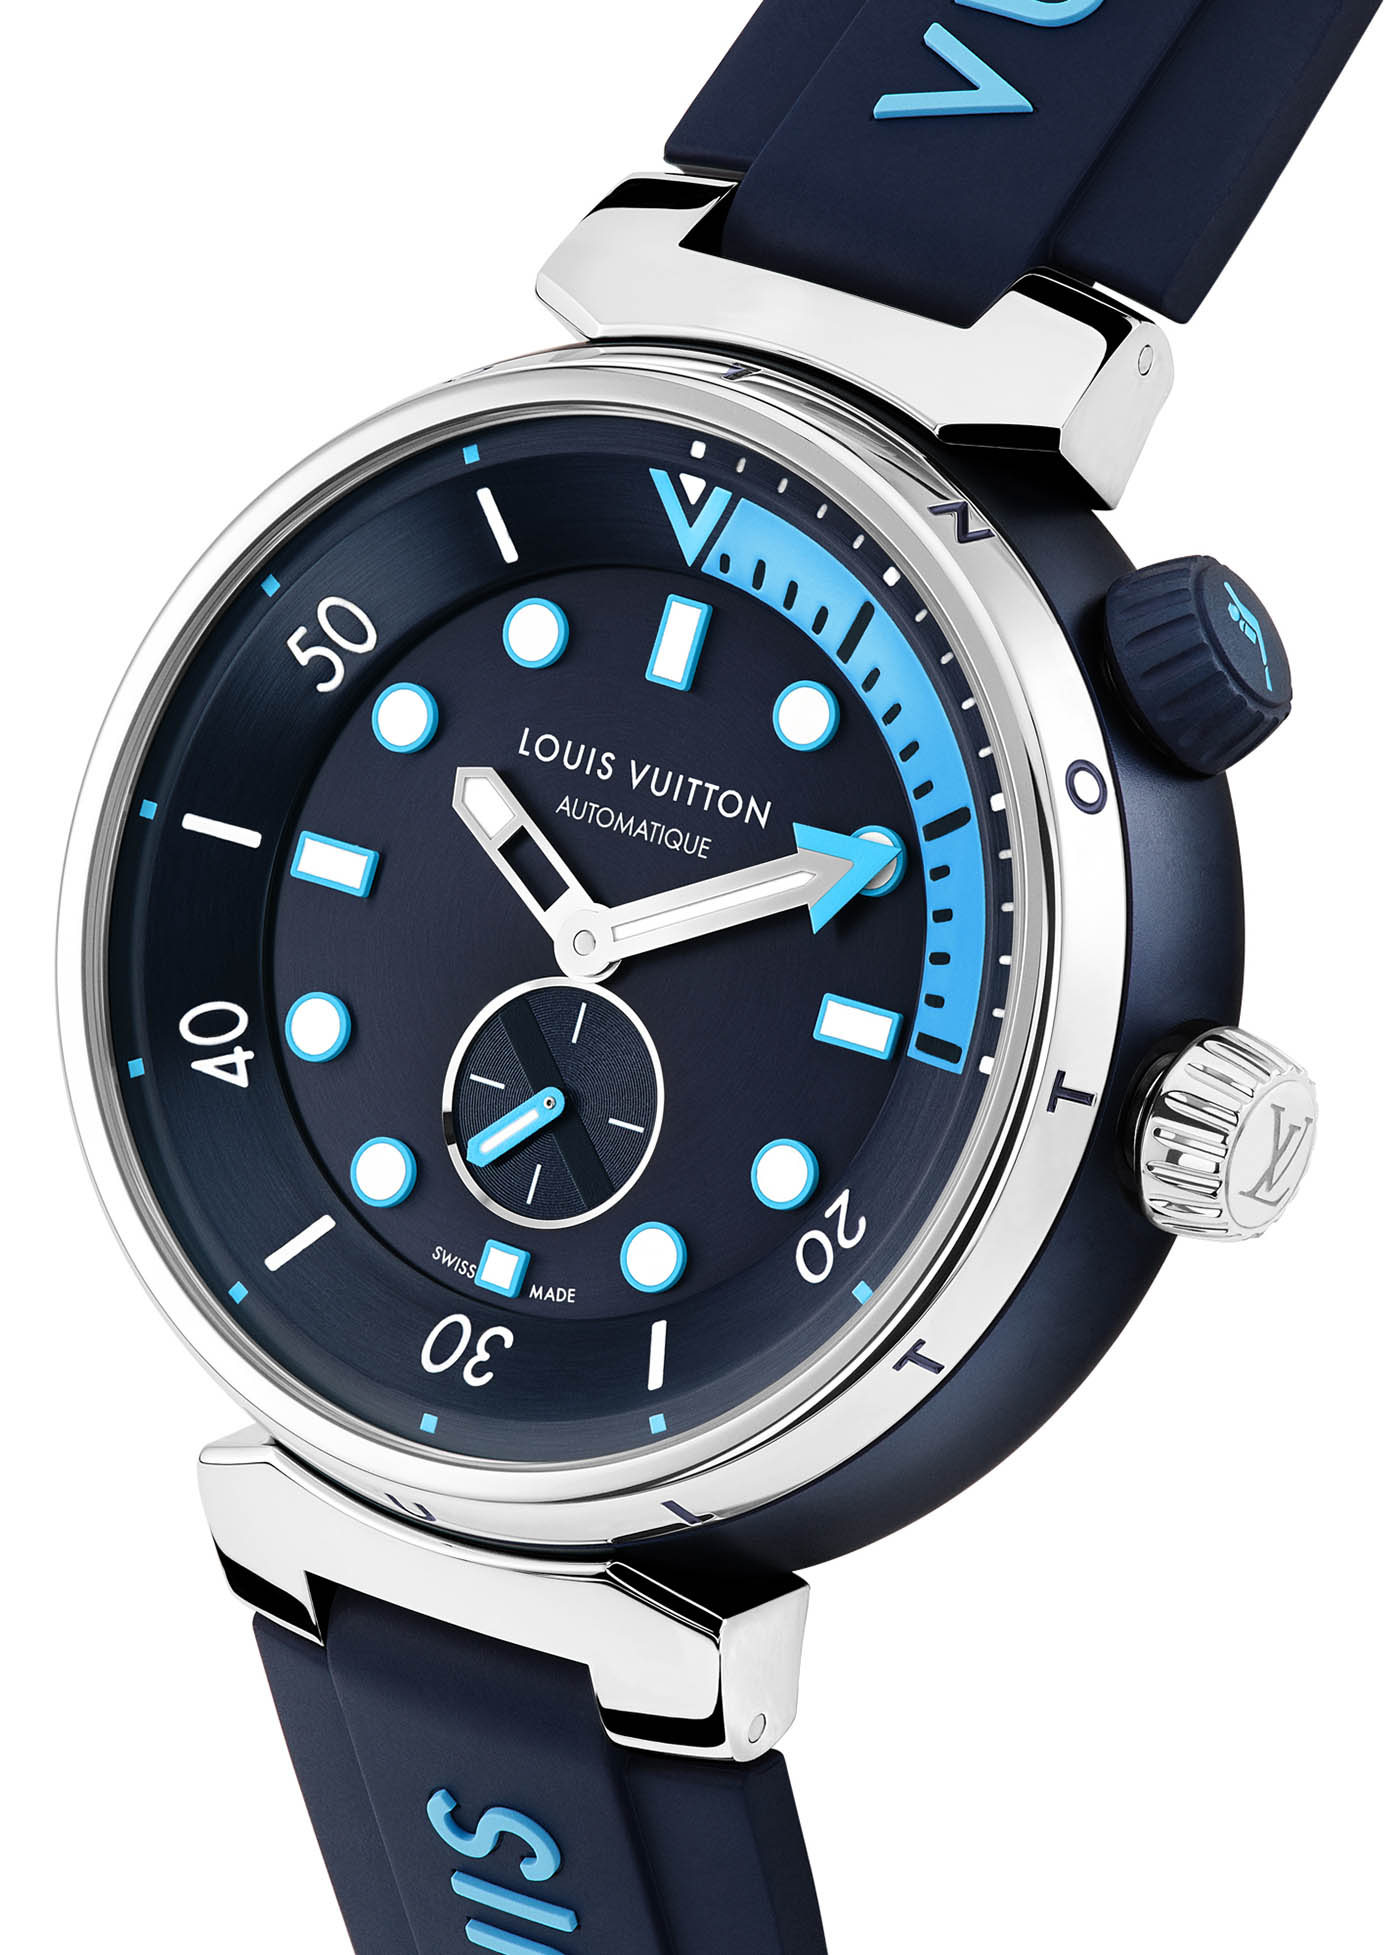 Tambour Street Diver, automatic, 44mm, steel - Watches